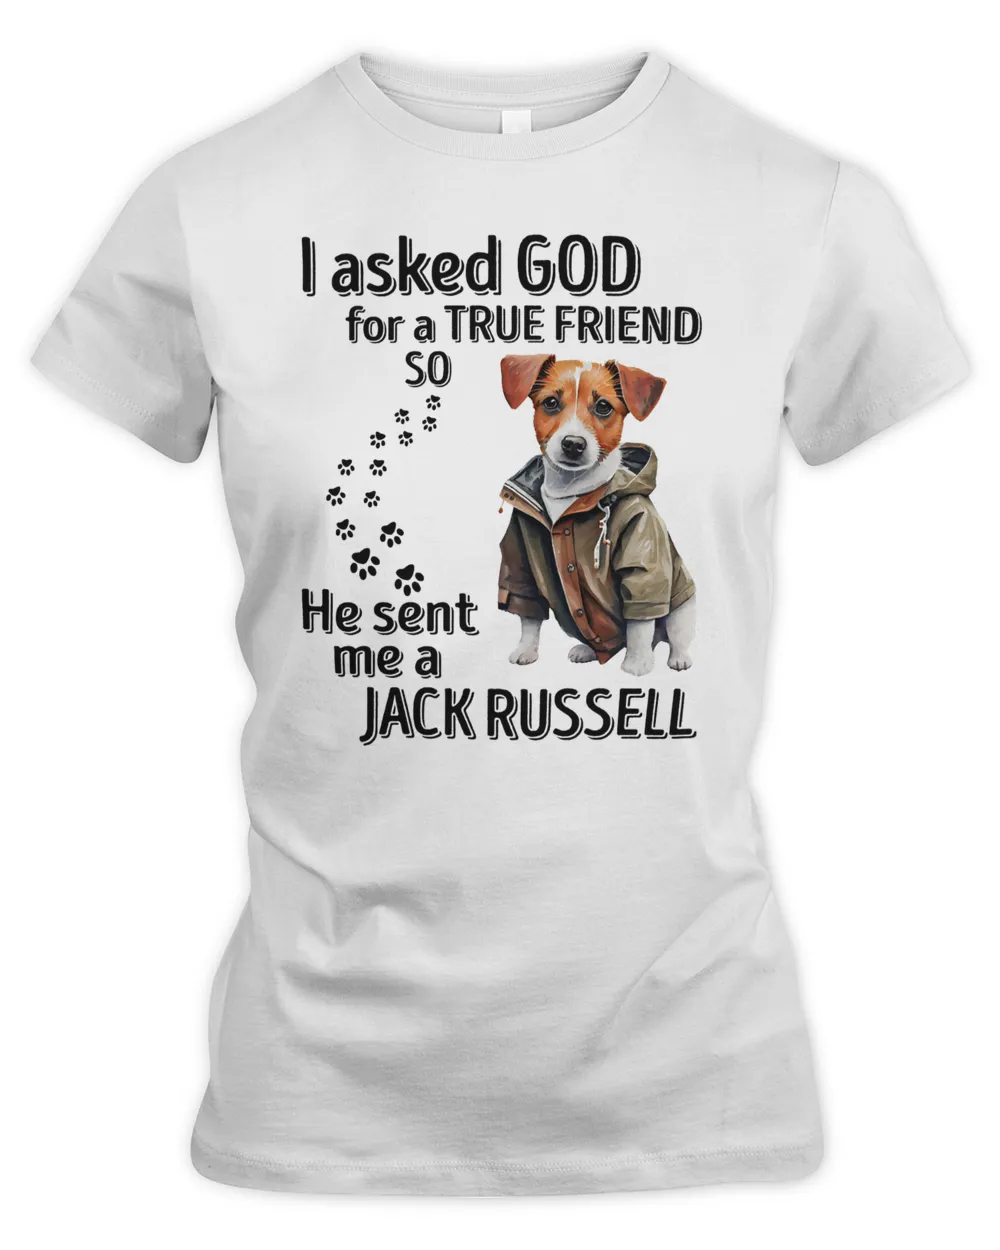 He sent me a Jack Russell